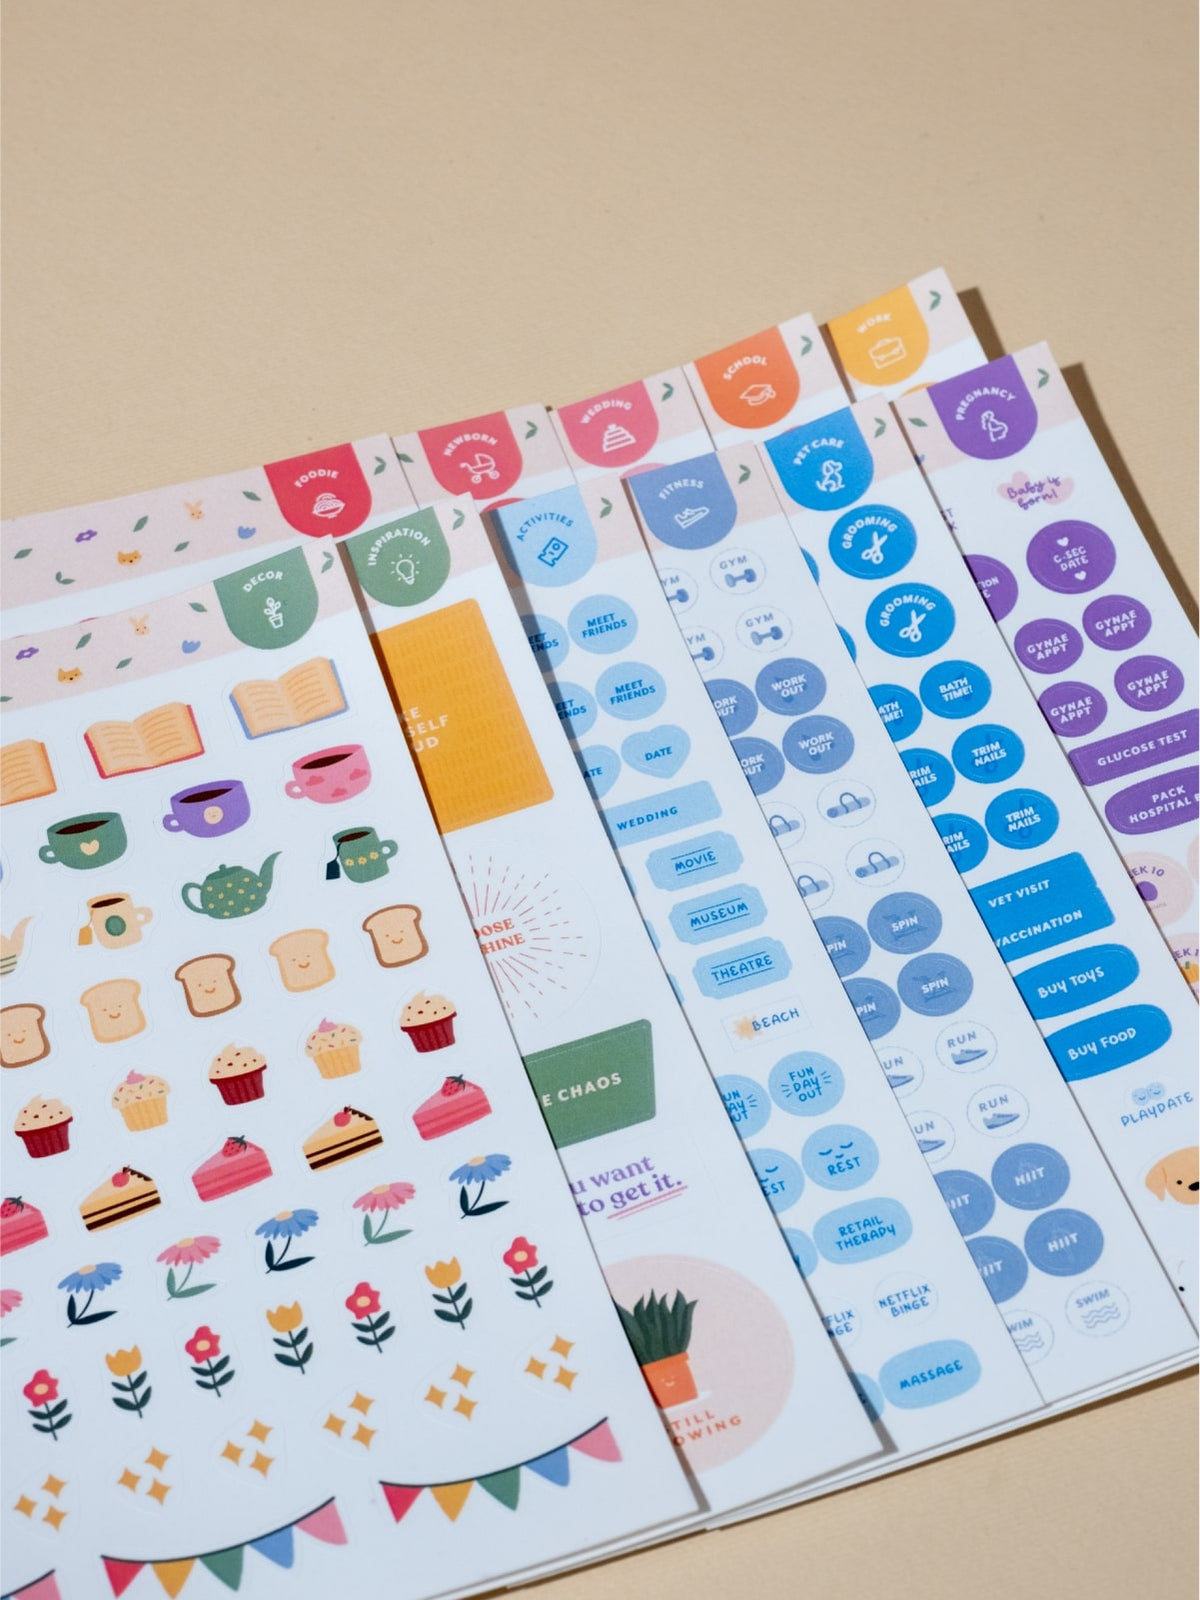 Inspiration (2023) - Colour-coded Planner Sticker Sheet